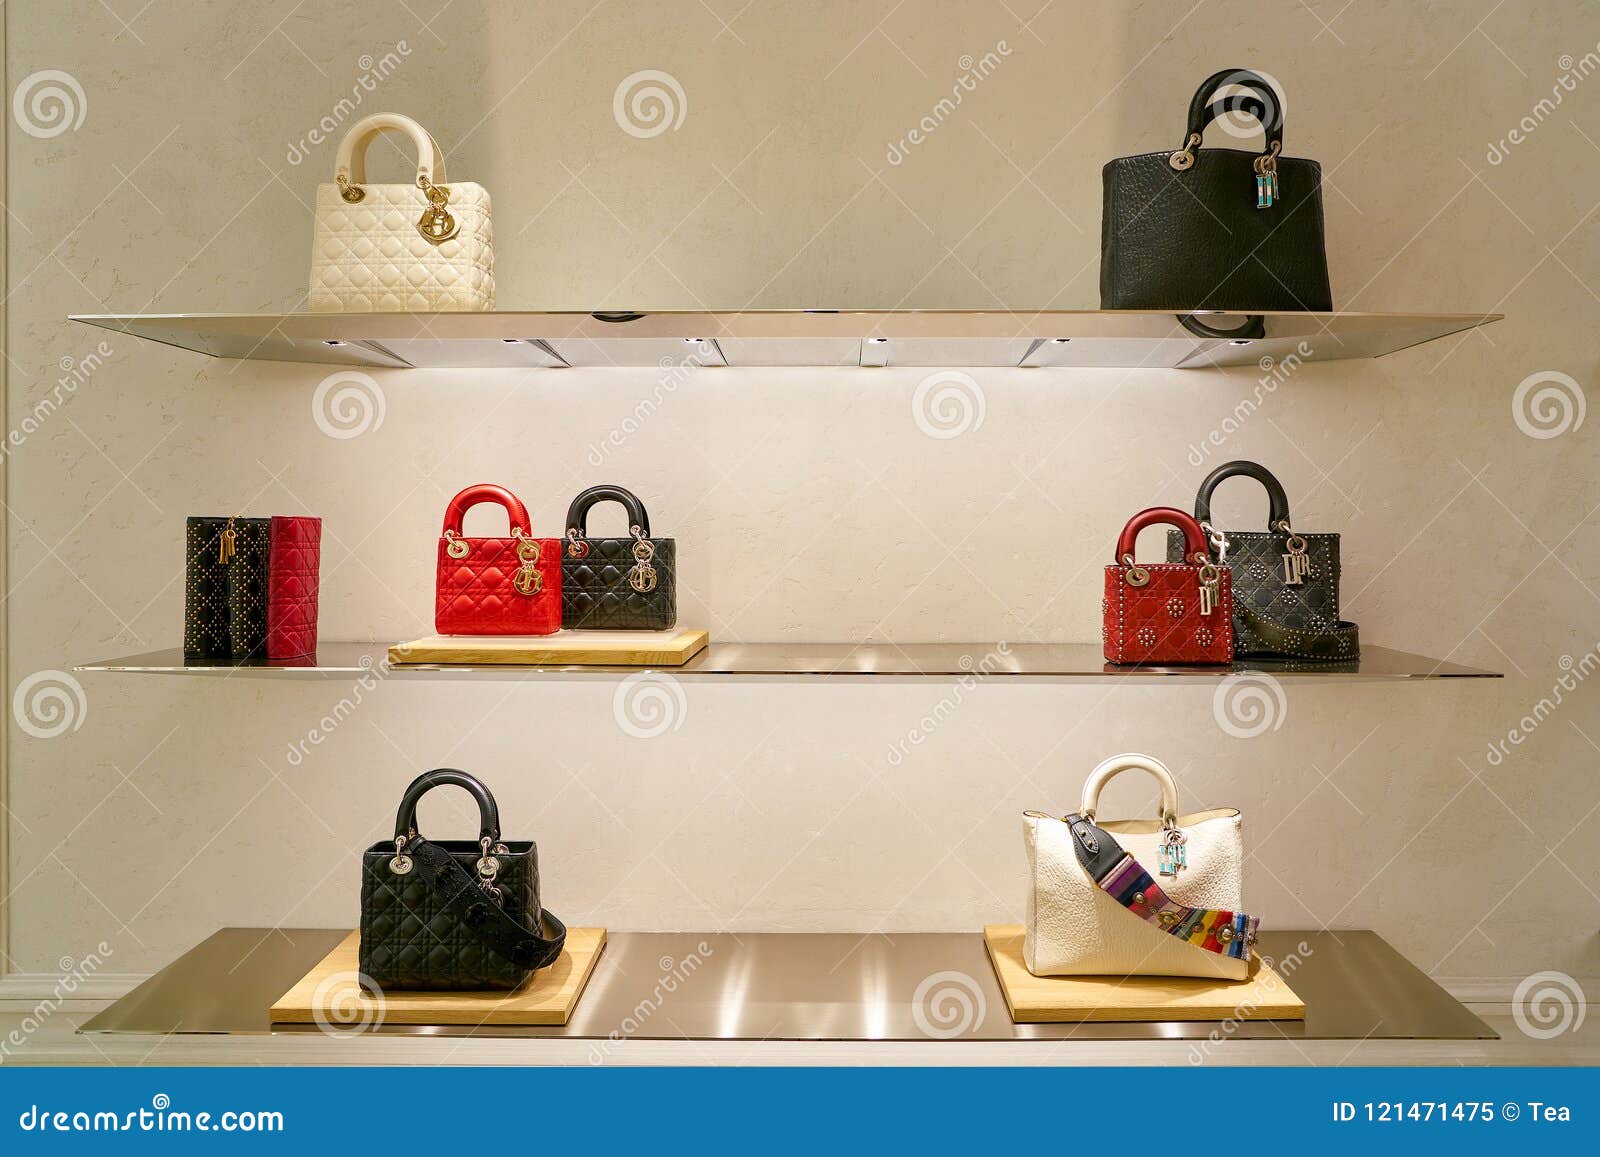 ROME, ITALY - CIRCA NOVEMBER, 2017: Inside Louis Vuitton Store At A Second  Flagship Store Of Rinascente In Rome. Louis Vuitton Is A Fashion House And  Luxury Retail Company. Stock Photo, Picture